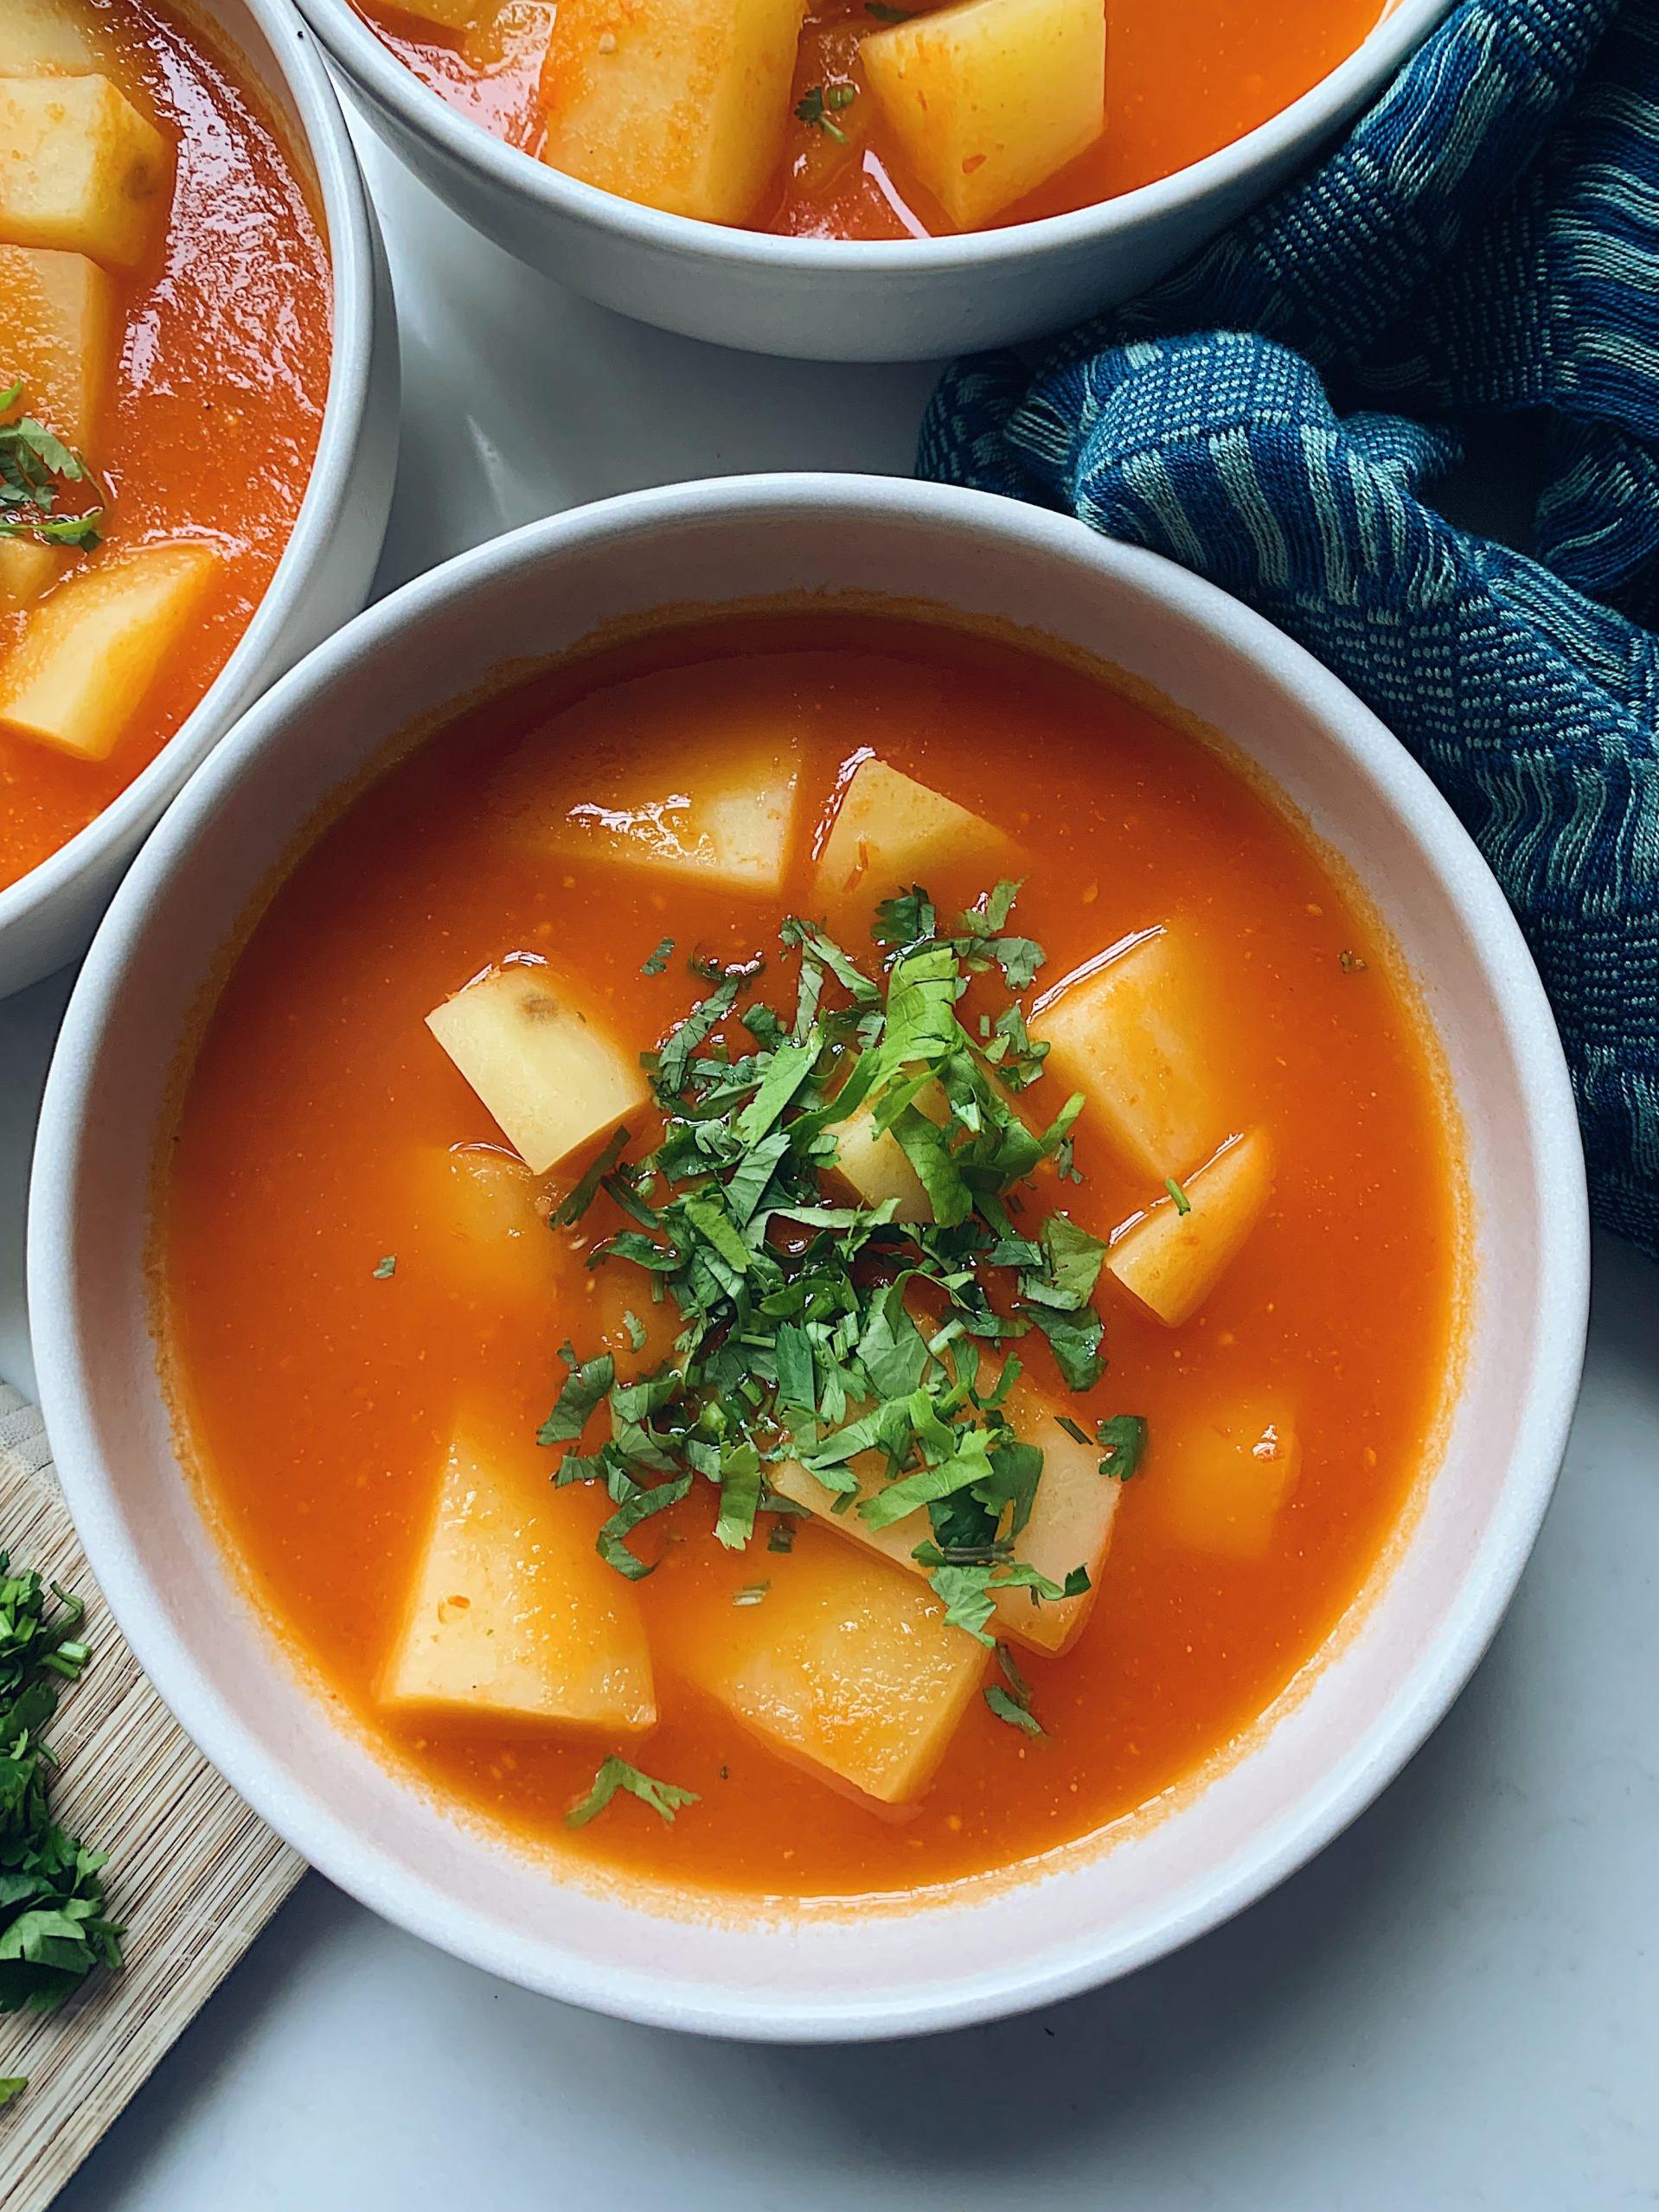  Don't let the simplicity of the ingredients fool you - this soup is delicious.